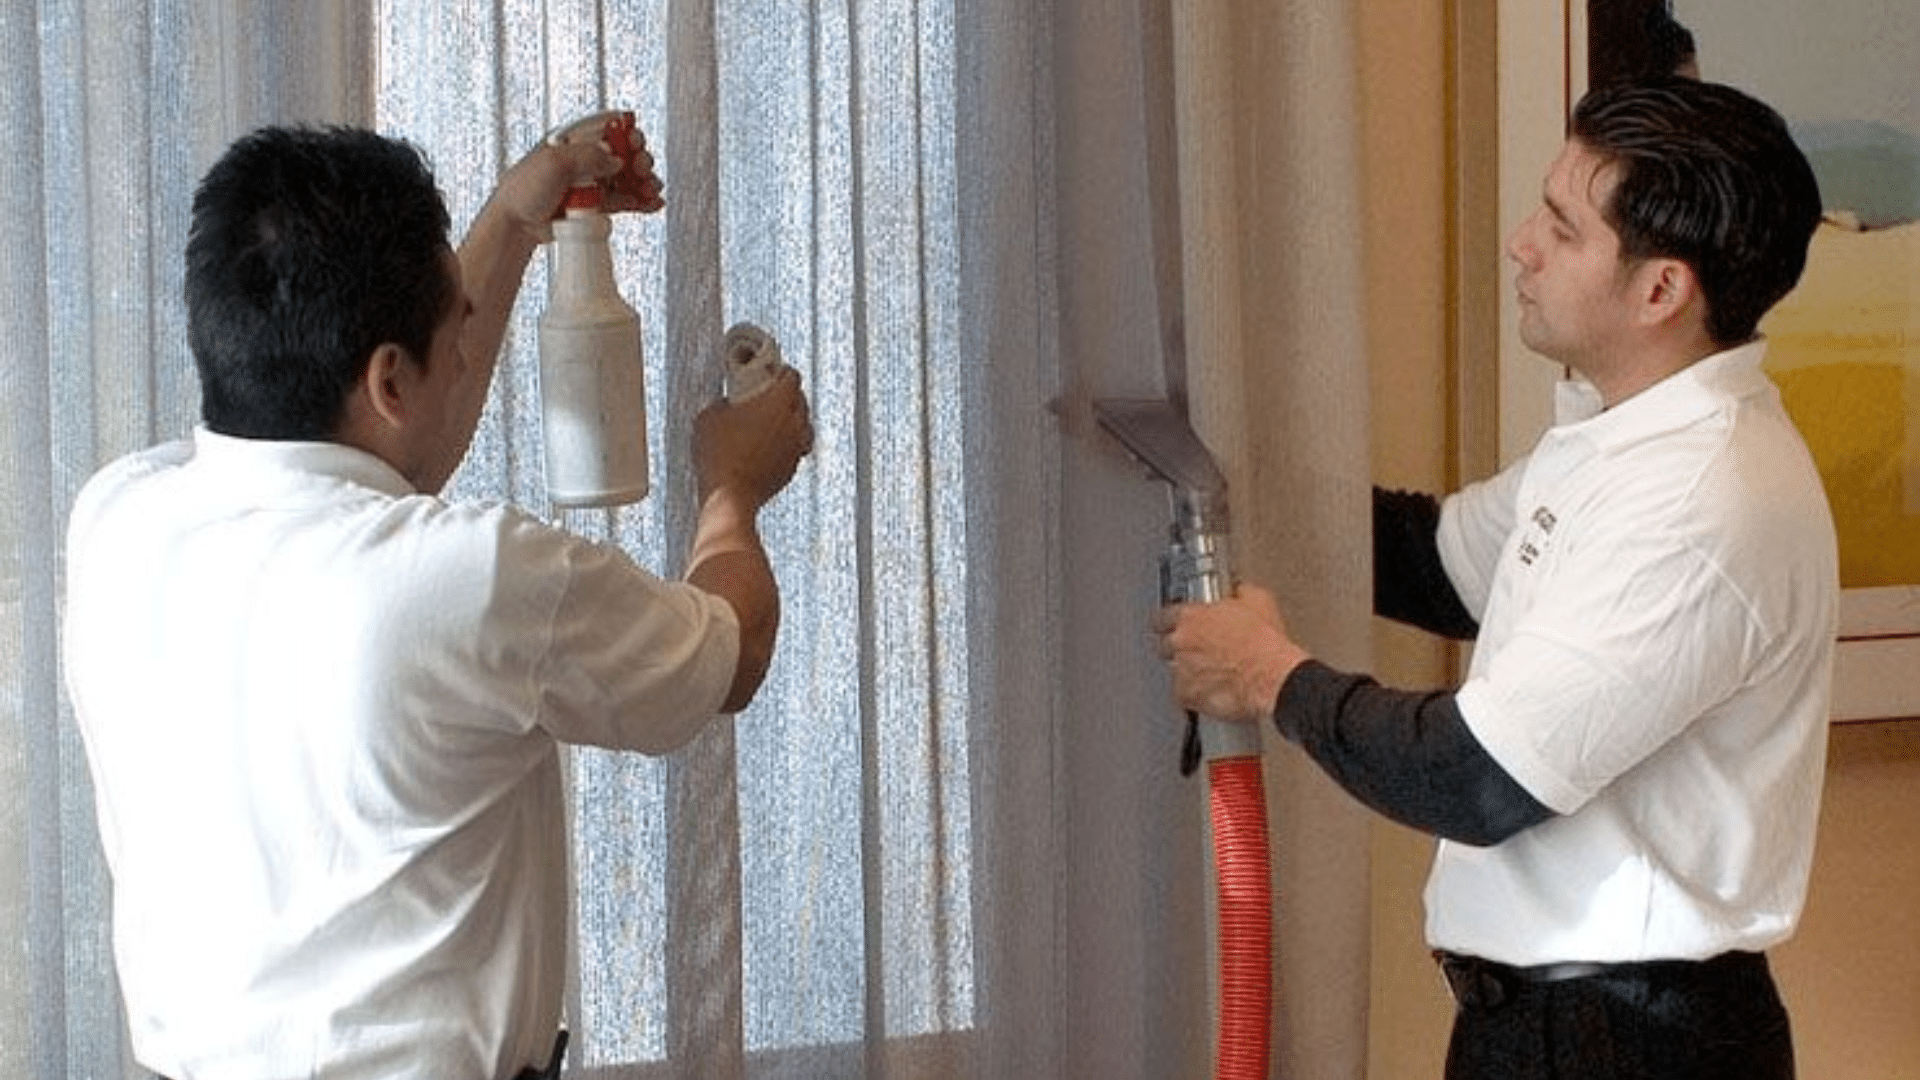 Curtain Cleaning Services